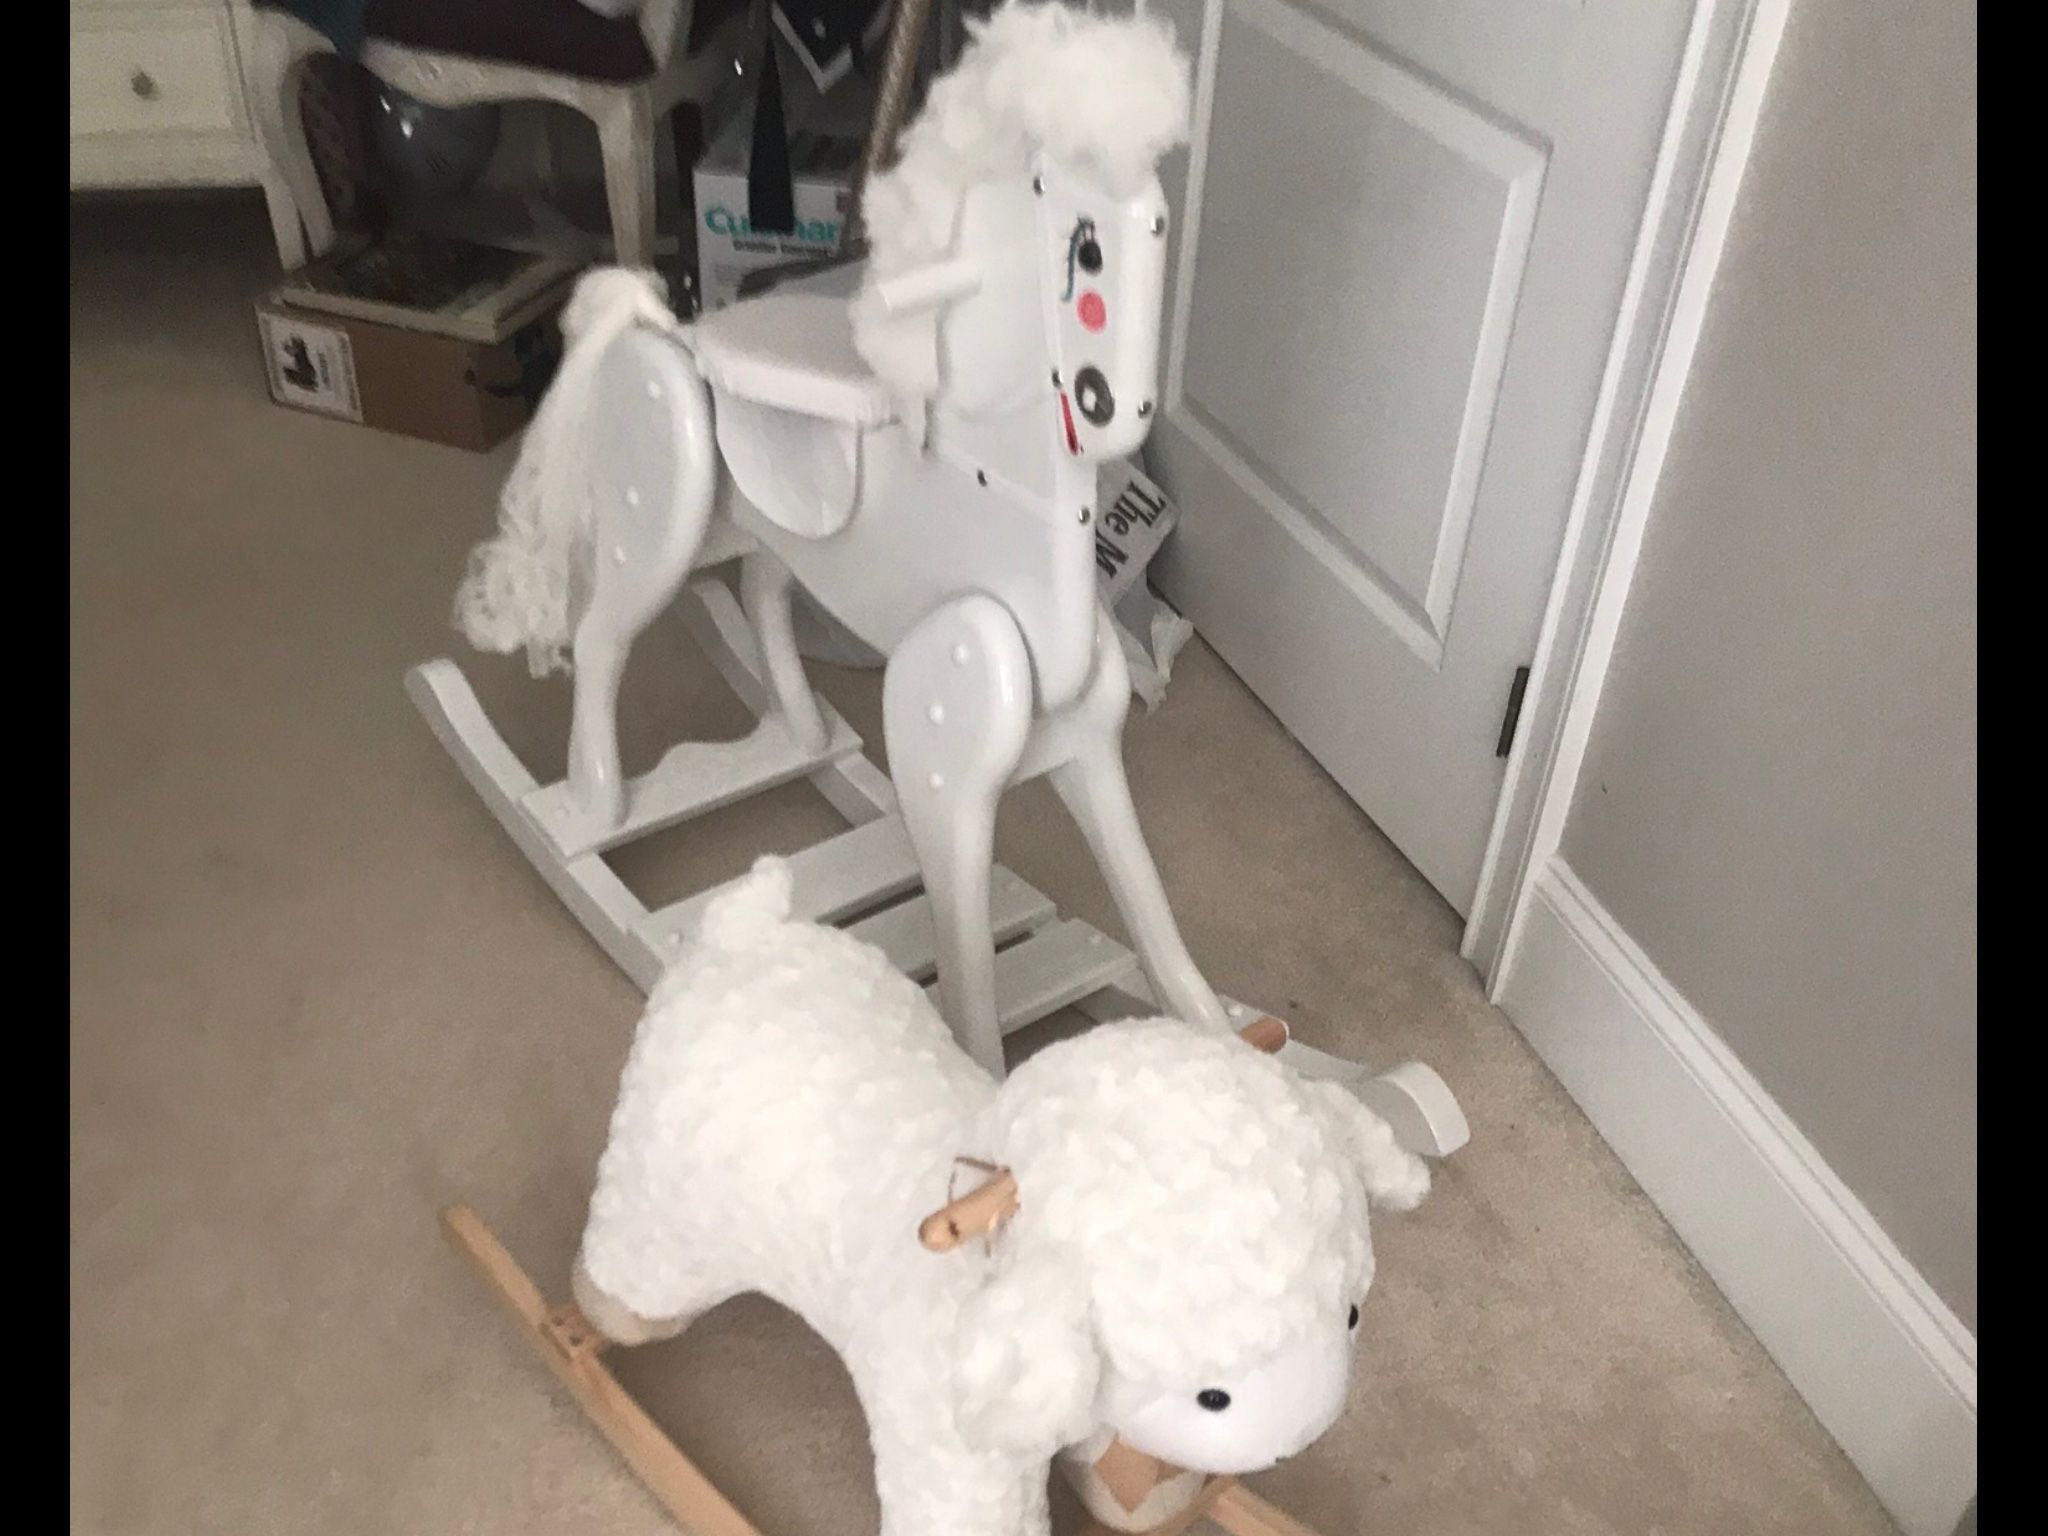 Great Kid Gifts Rocking Horse High End Stuffed Animas Bear Sells For 150 On Line Priced Sep